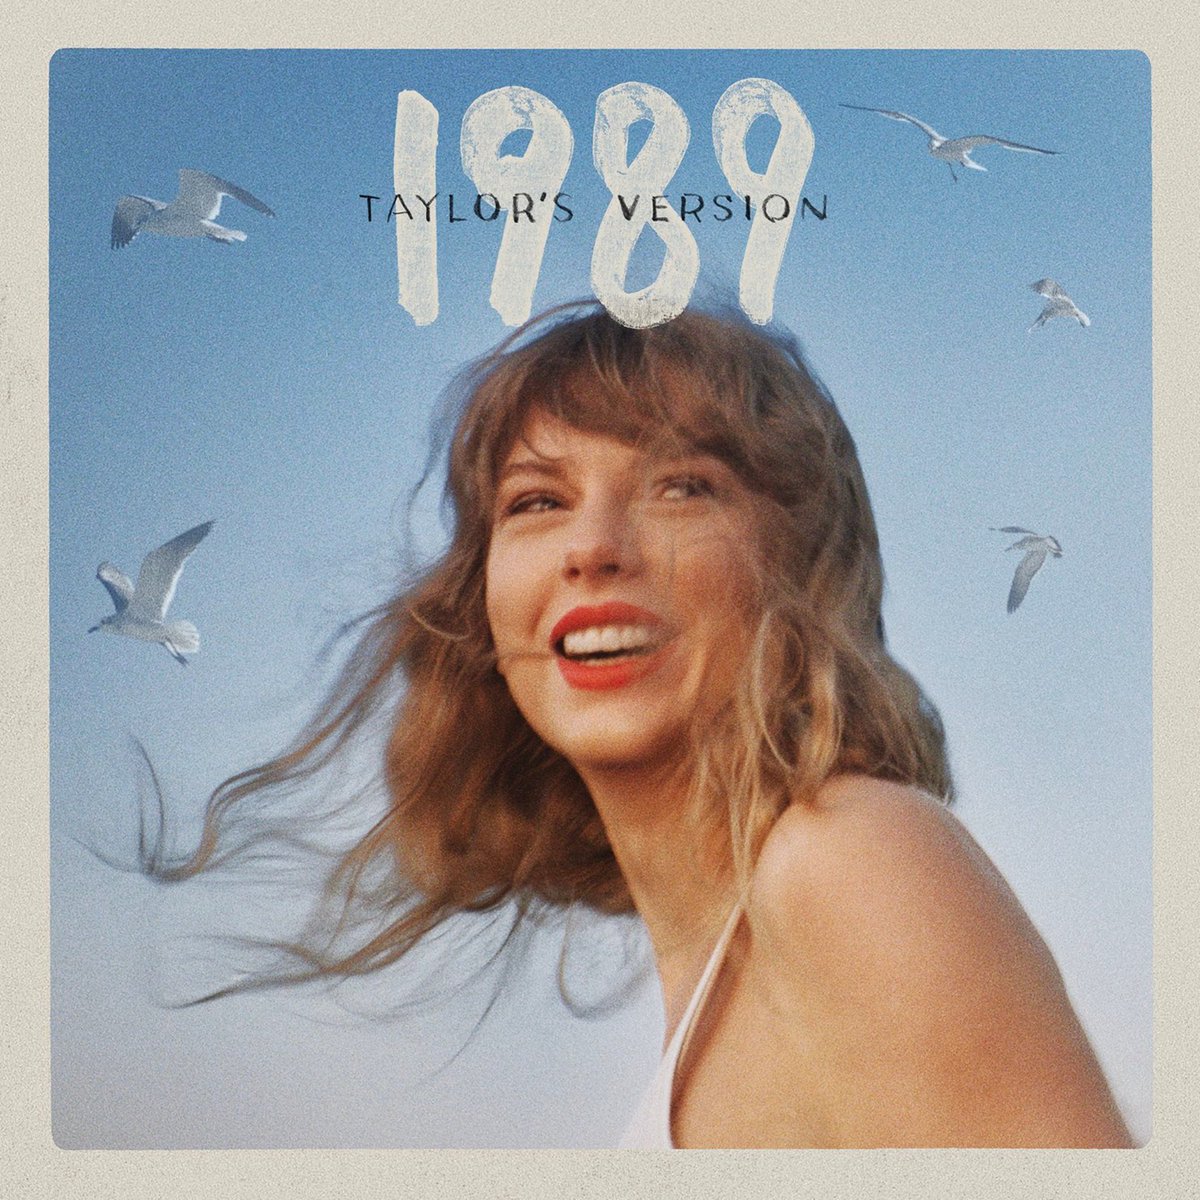 Taylor Swift's “1989” has been ranked #18 in Apple Music's #100BestAlbums of all time.

The quintessential, career-defining, GRAMMY AOTY-winning album debuted with 1.287M on Billboard 200, stayed 11 weeks at #1 (23 weeks in Top 2), and is the #1 most-awarded pop album in history.